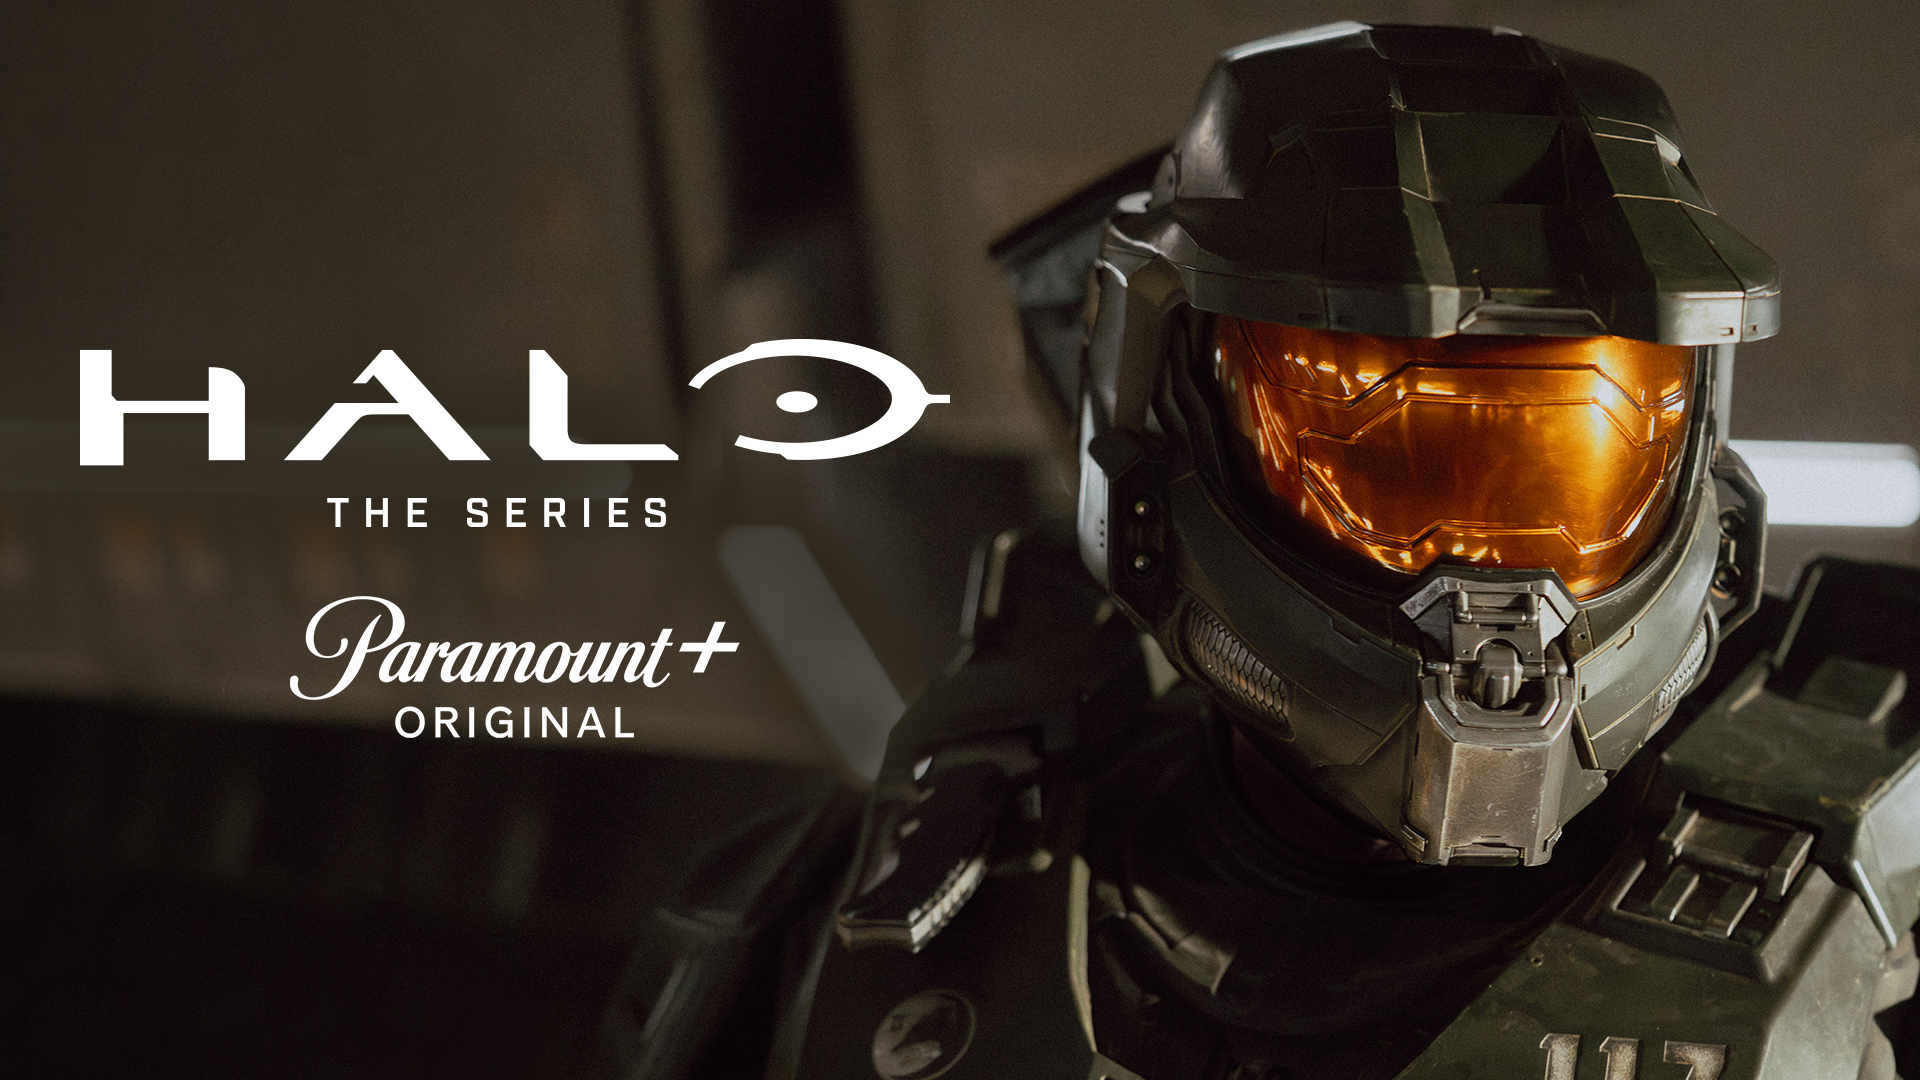 Xbox and Swarovski Celebrate 20 Years of Halo with Two Epic